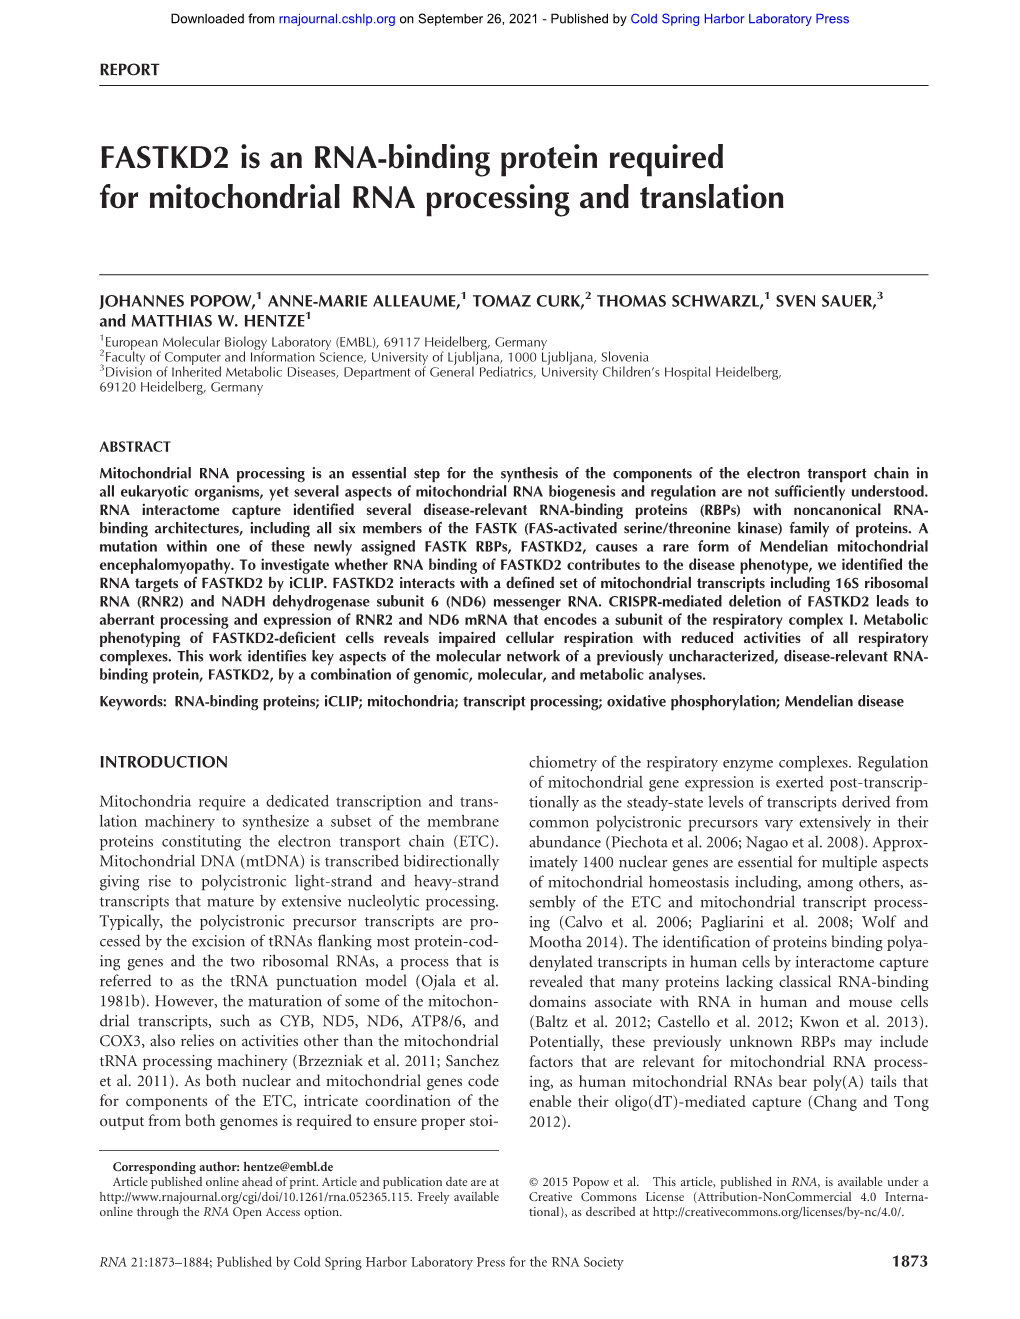 FASTKD2 Is an RNA-Binding Protein Required for Mitochondrial RNA Processing and Translation